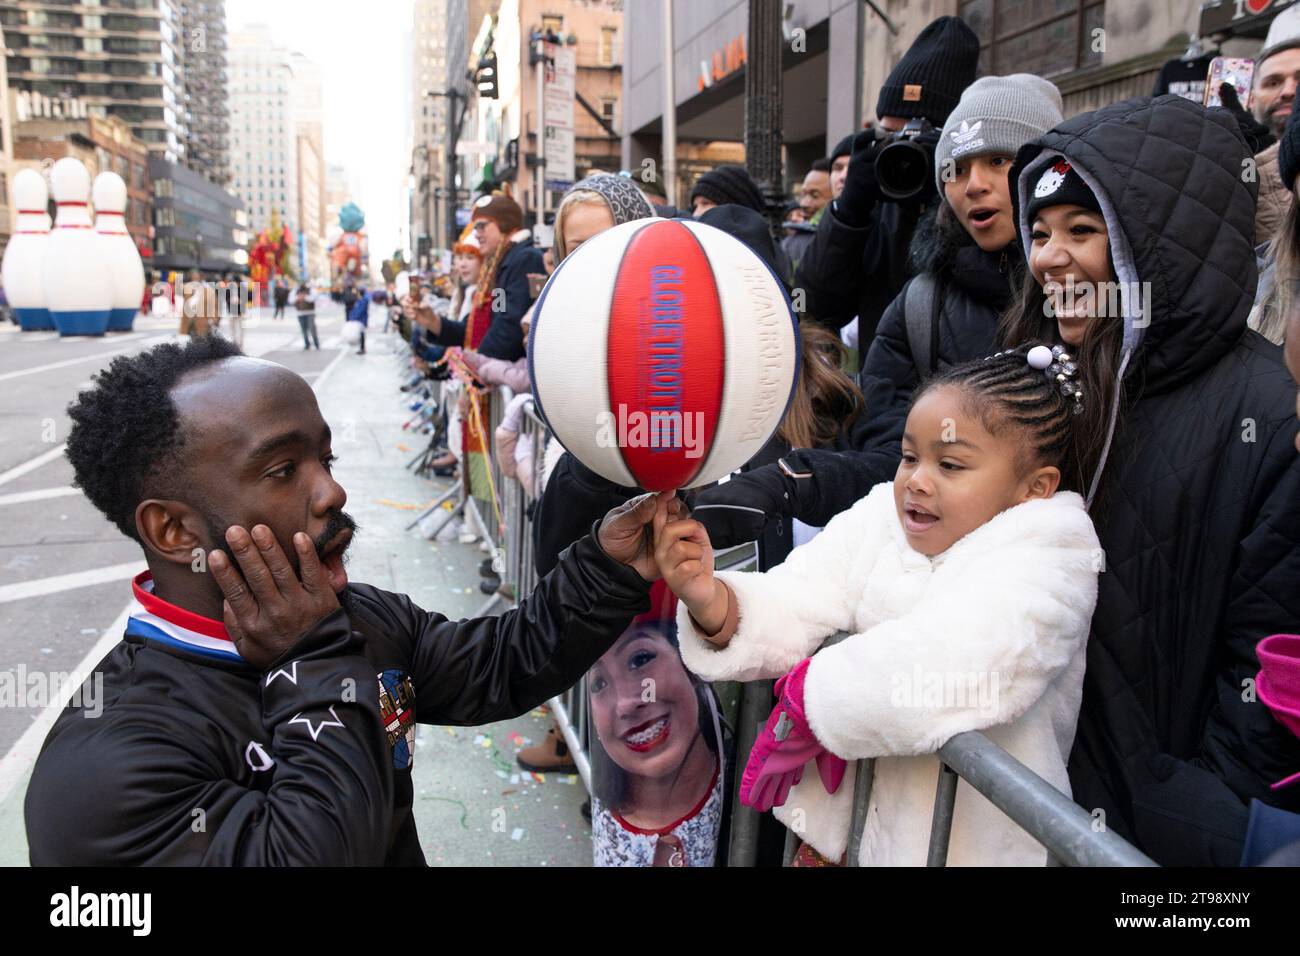 Brenda Bauchman, 4 watches as Hot Shot Swanson from the Harlem Globetrotters places a spinning basketball on her thumb as her family watches, during the Macys Thanksgiving Day Parade on Thursday November 23, in Manhattan, New York. (Photo by Mattie Neretin/Sipa USA). Credit: Sipa USA/Alamy Live News Stock Photo